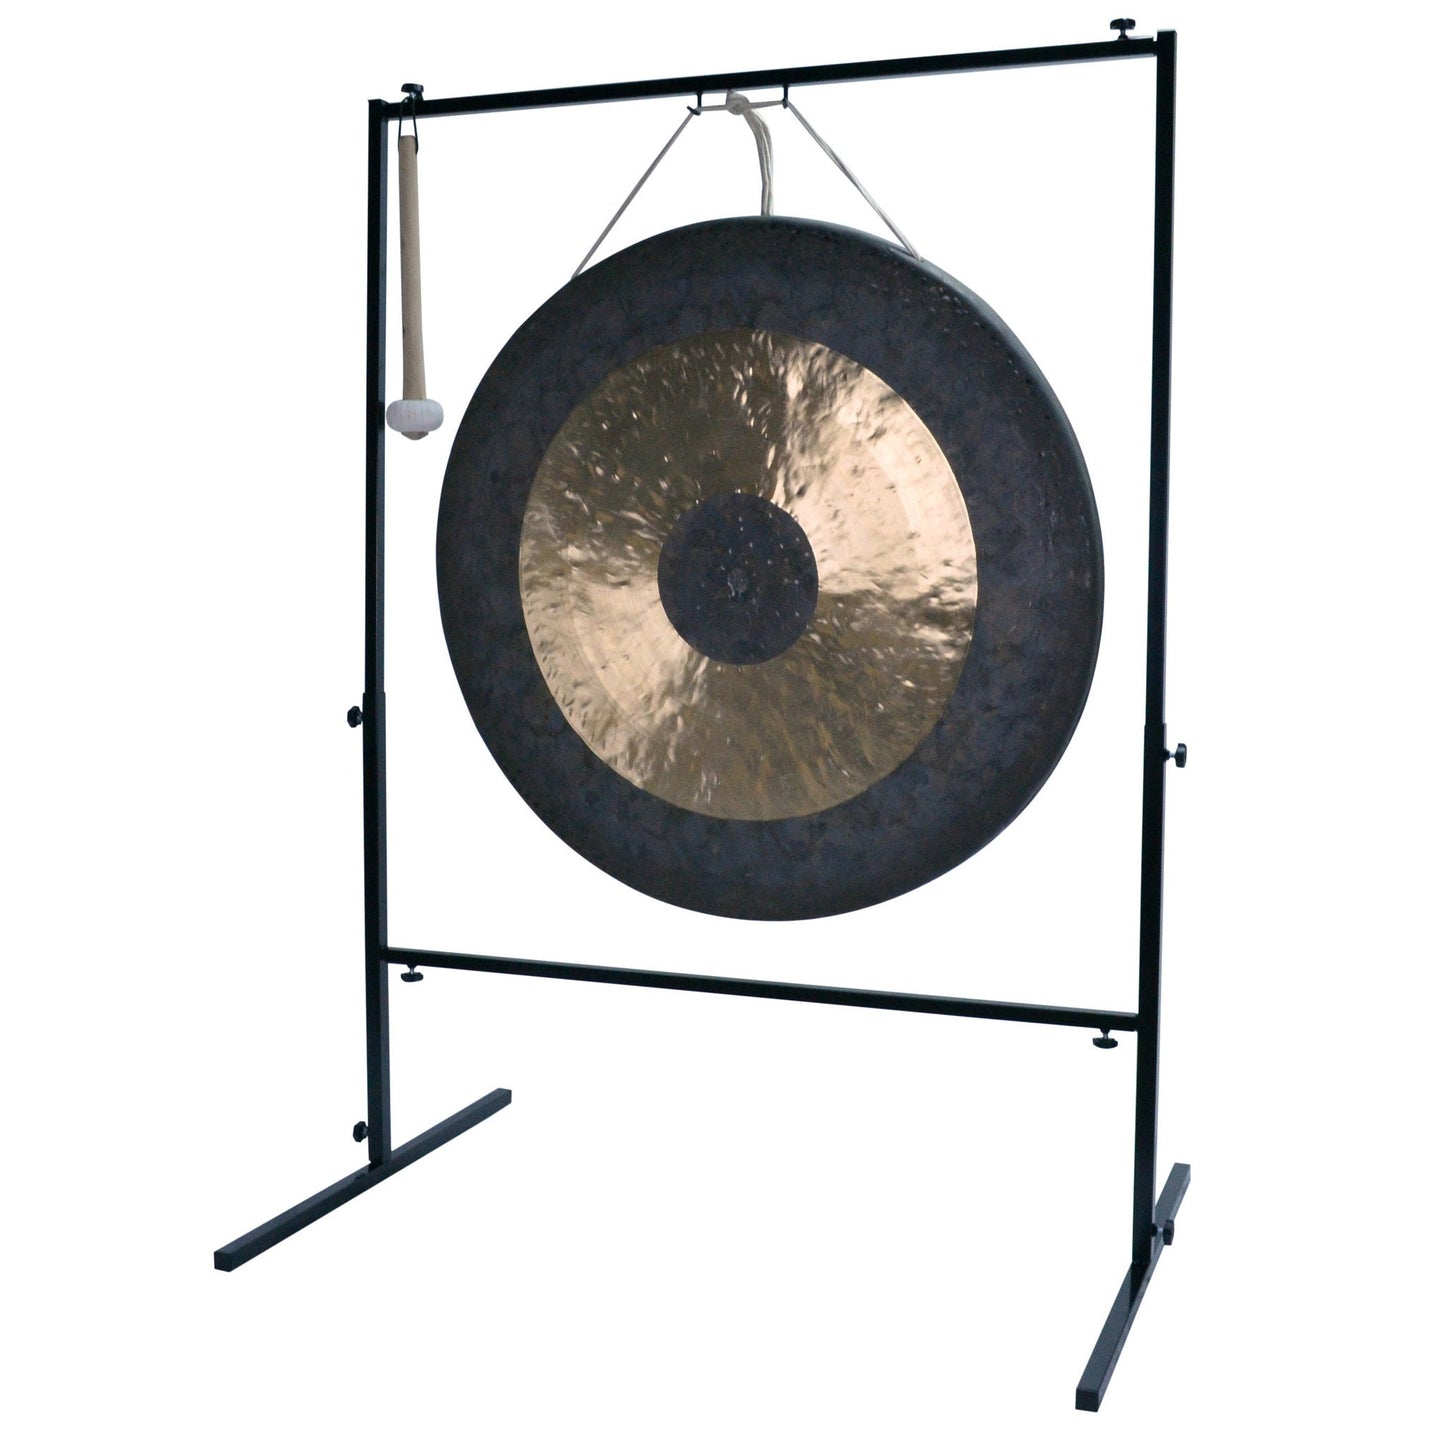 The Gong Shop Huge Chinese Gongs with Stand Combos 36" to 50" 40" Chau Gong on Wuhan Gong Stand with Mallet